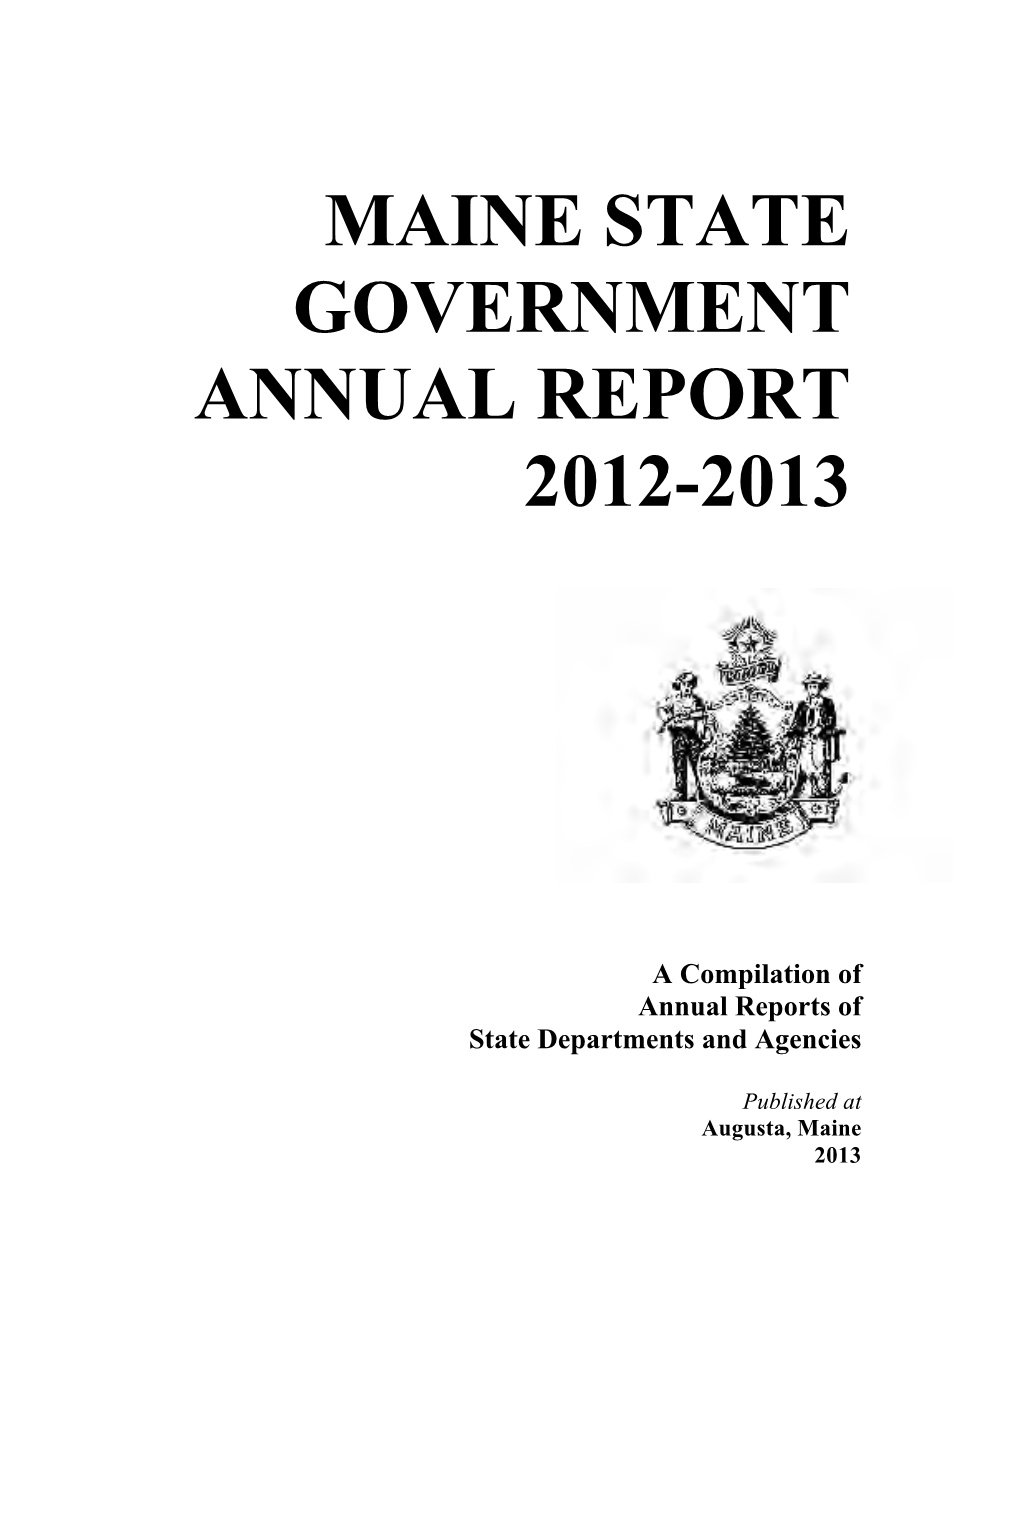 Maine State Government Annual Report 2012-2013